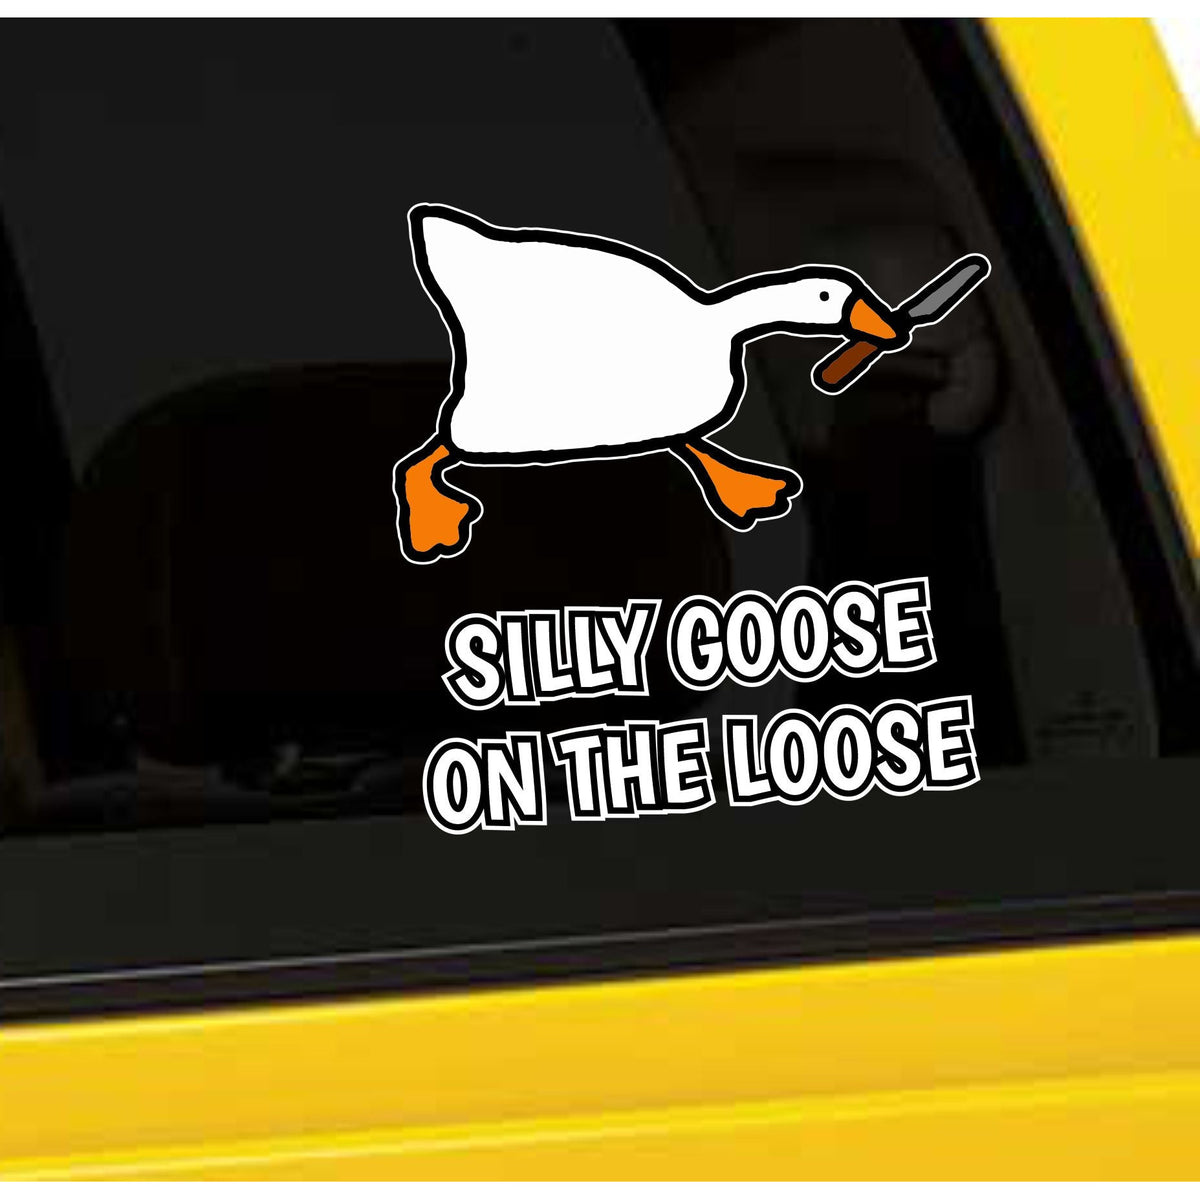 Silly Goose Stickers